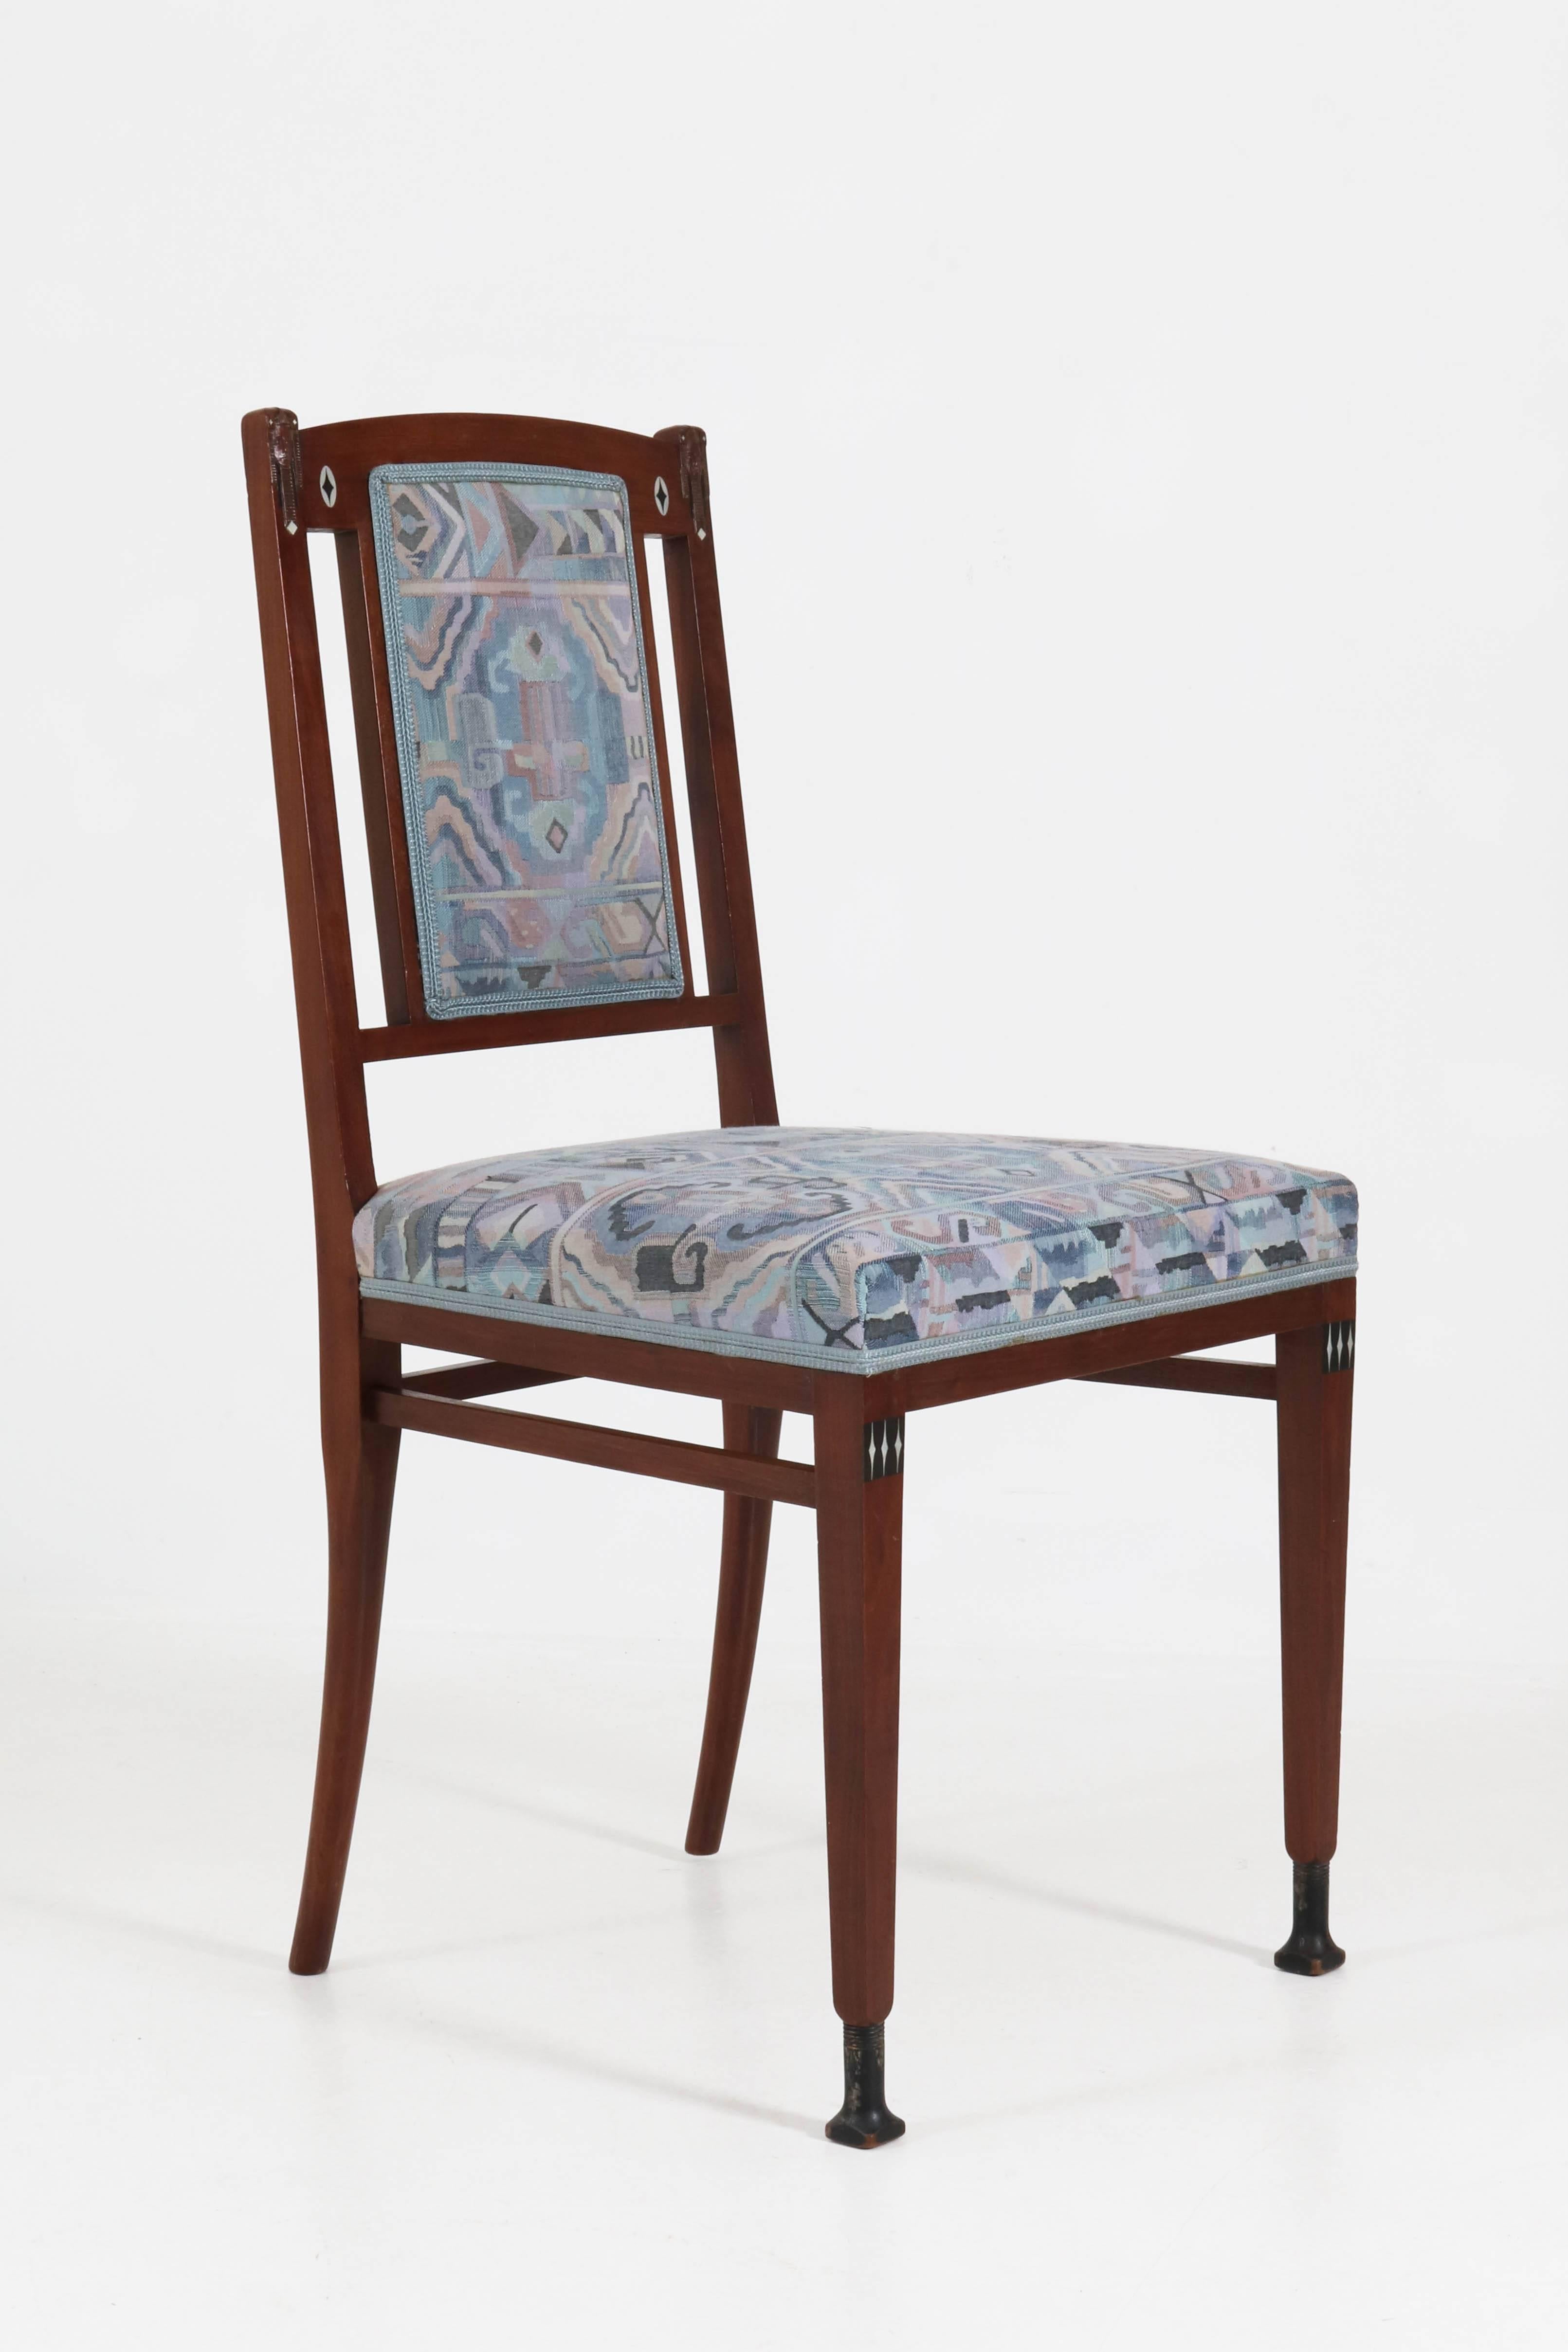 Four Mahogany Dutch Art Nouveau Chairs by J.M. Middelraad for Pander, 1900s 1